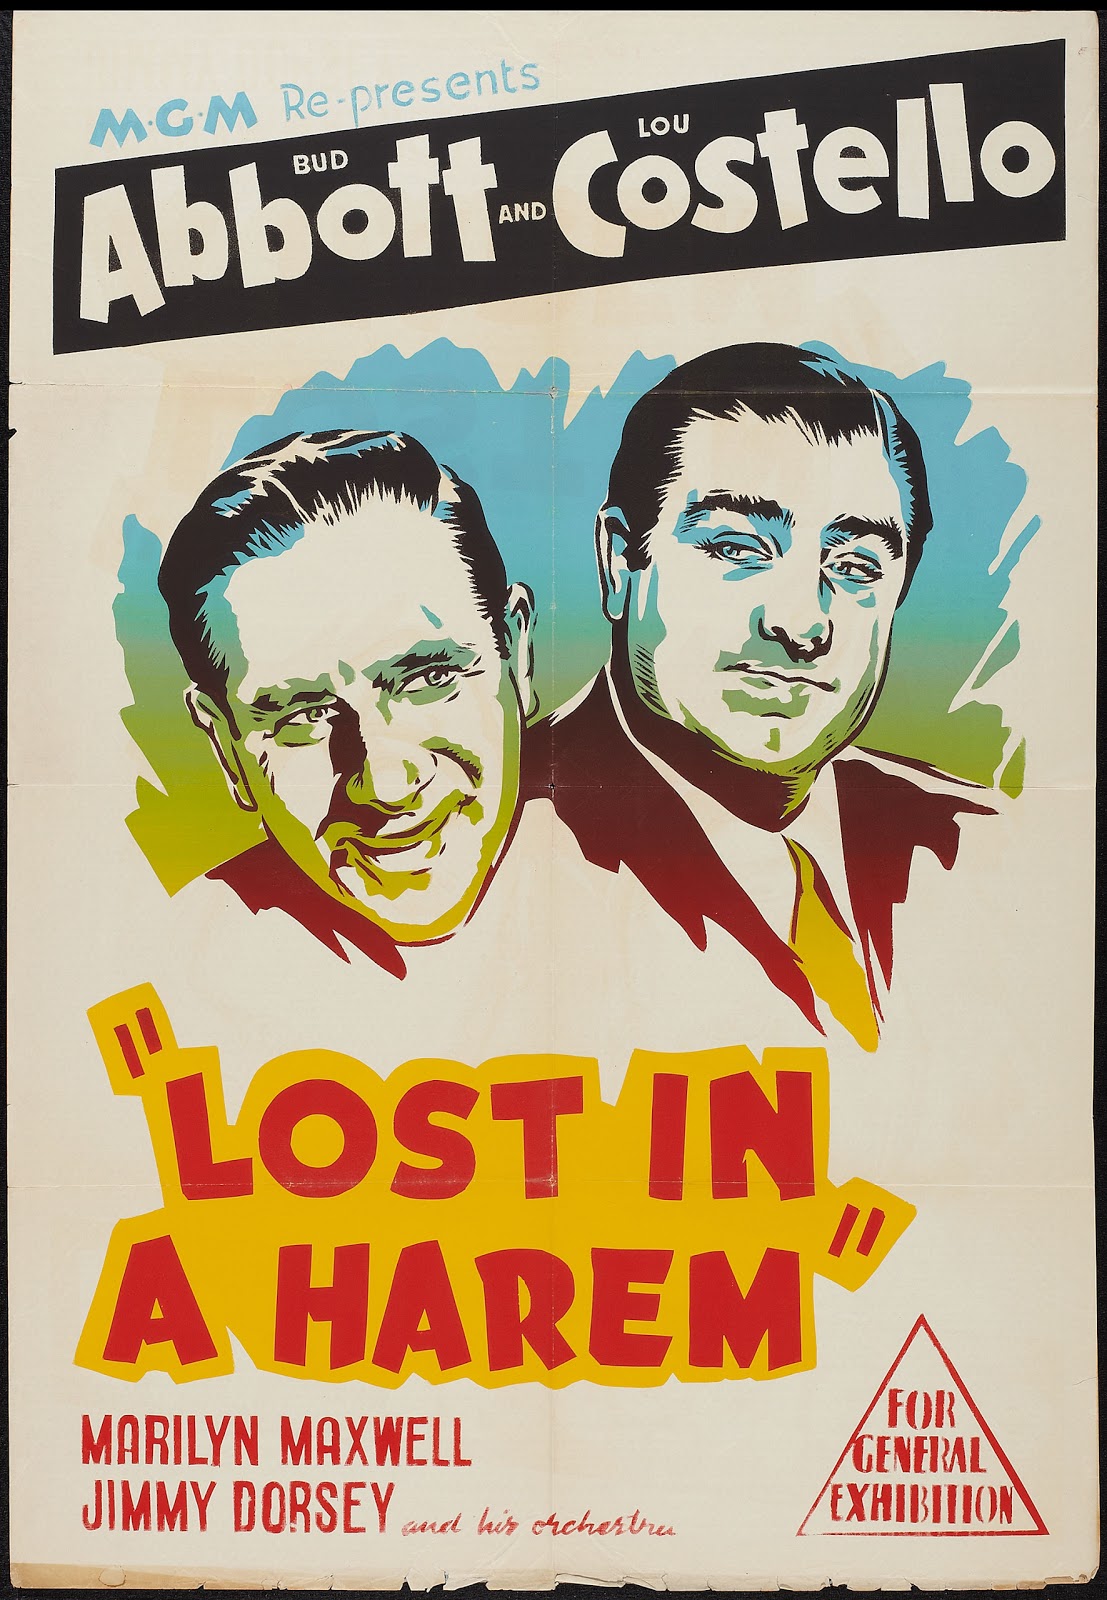 Free Classic Movies: ABBOTT AND COSTELLO MOVIE POSTER FOR SALE